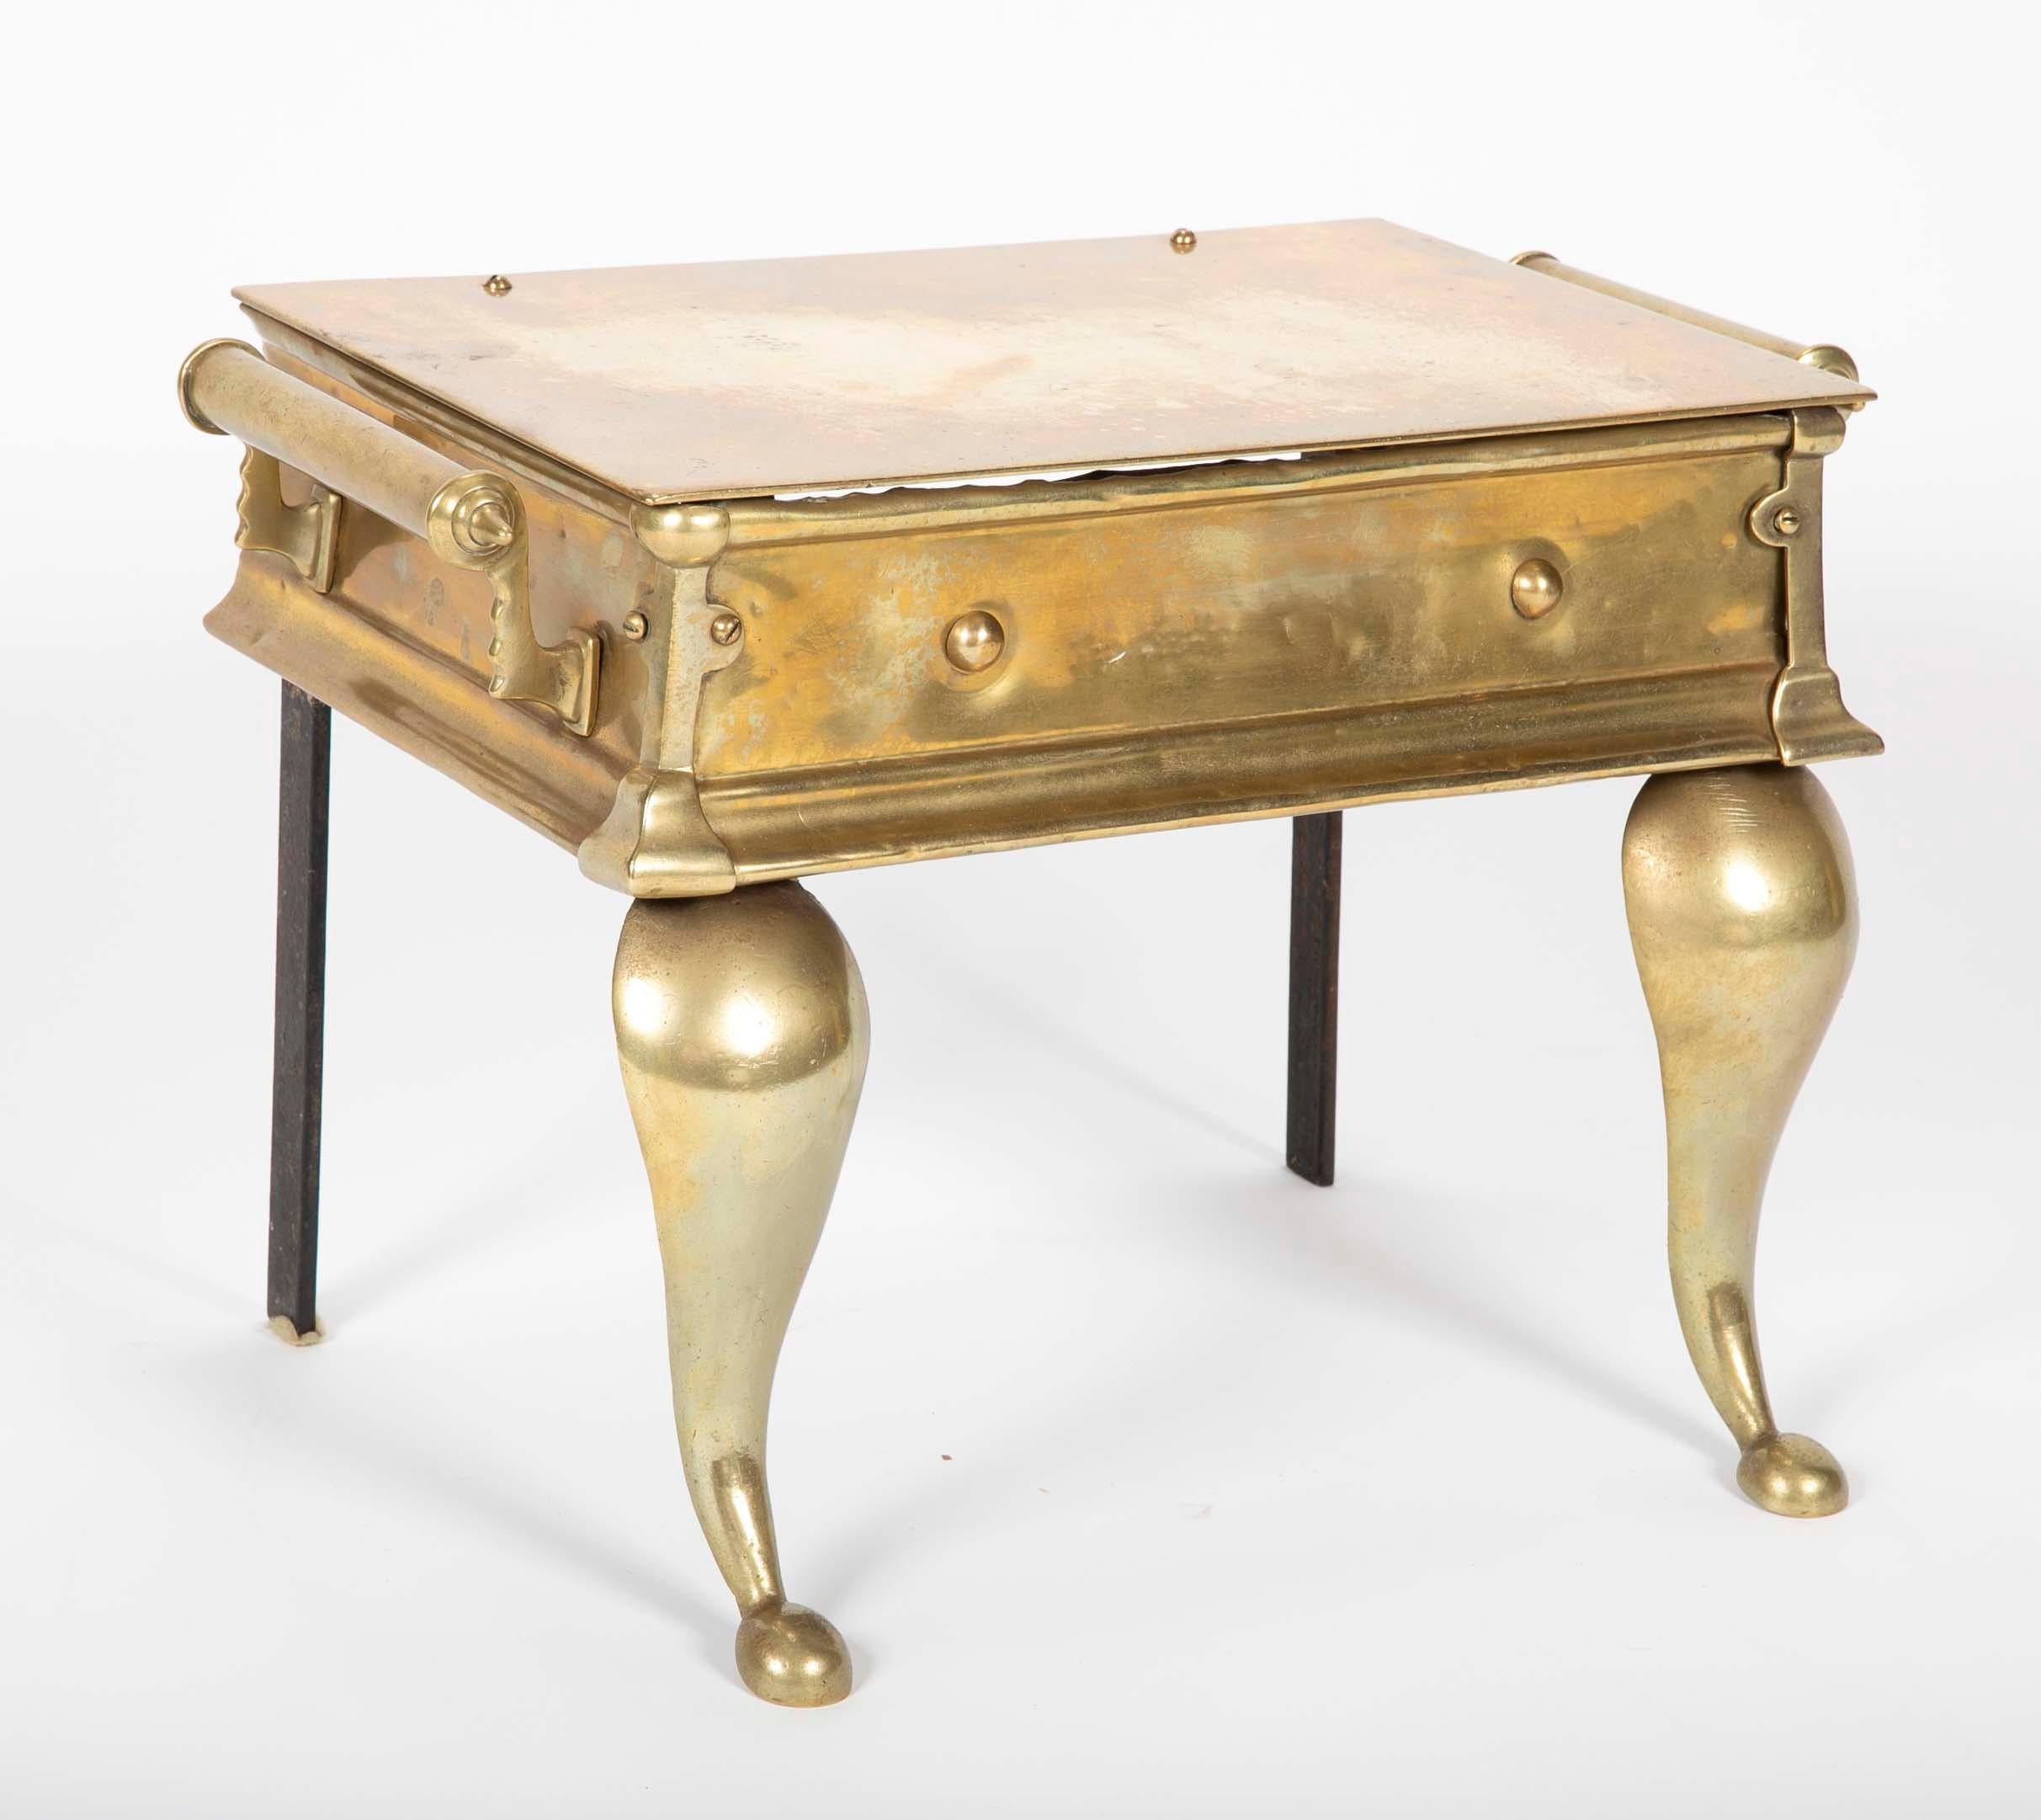 19th century English Regency brass footman, or fireplace trivet, makes a wonderful and unusual drinks or side table. With cabriole legs and handsome detailing on the corners and handles. Circa 1825. 
Measures: 12 inches high 18 wide 12 deep.